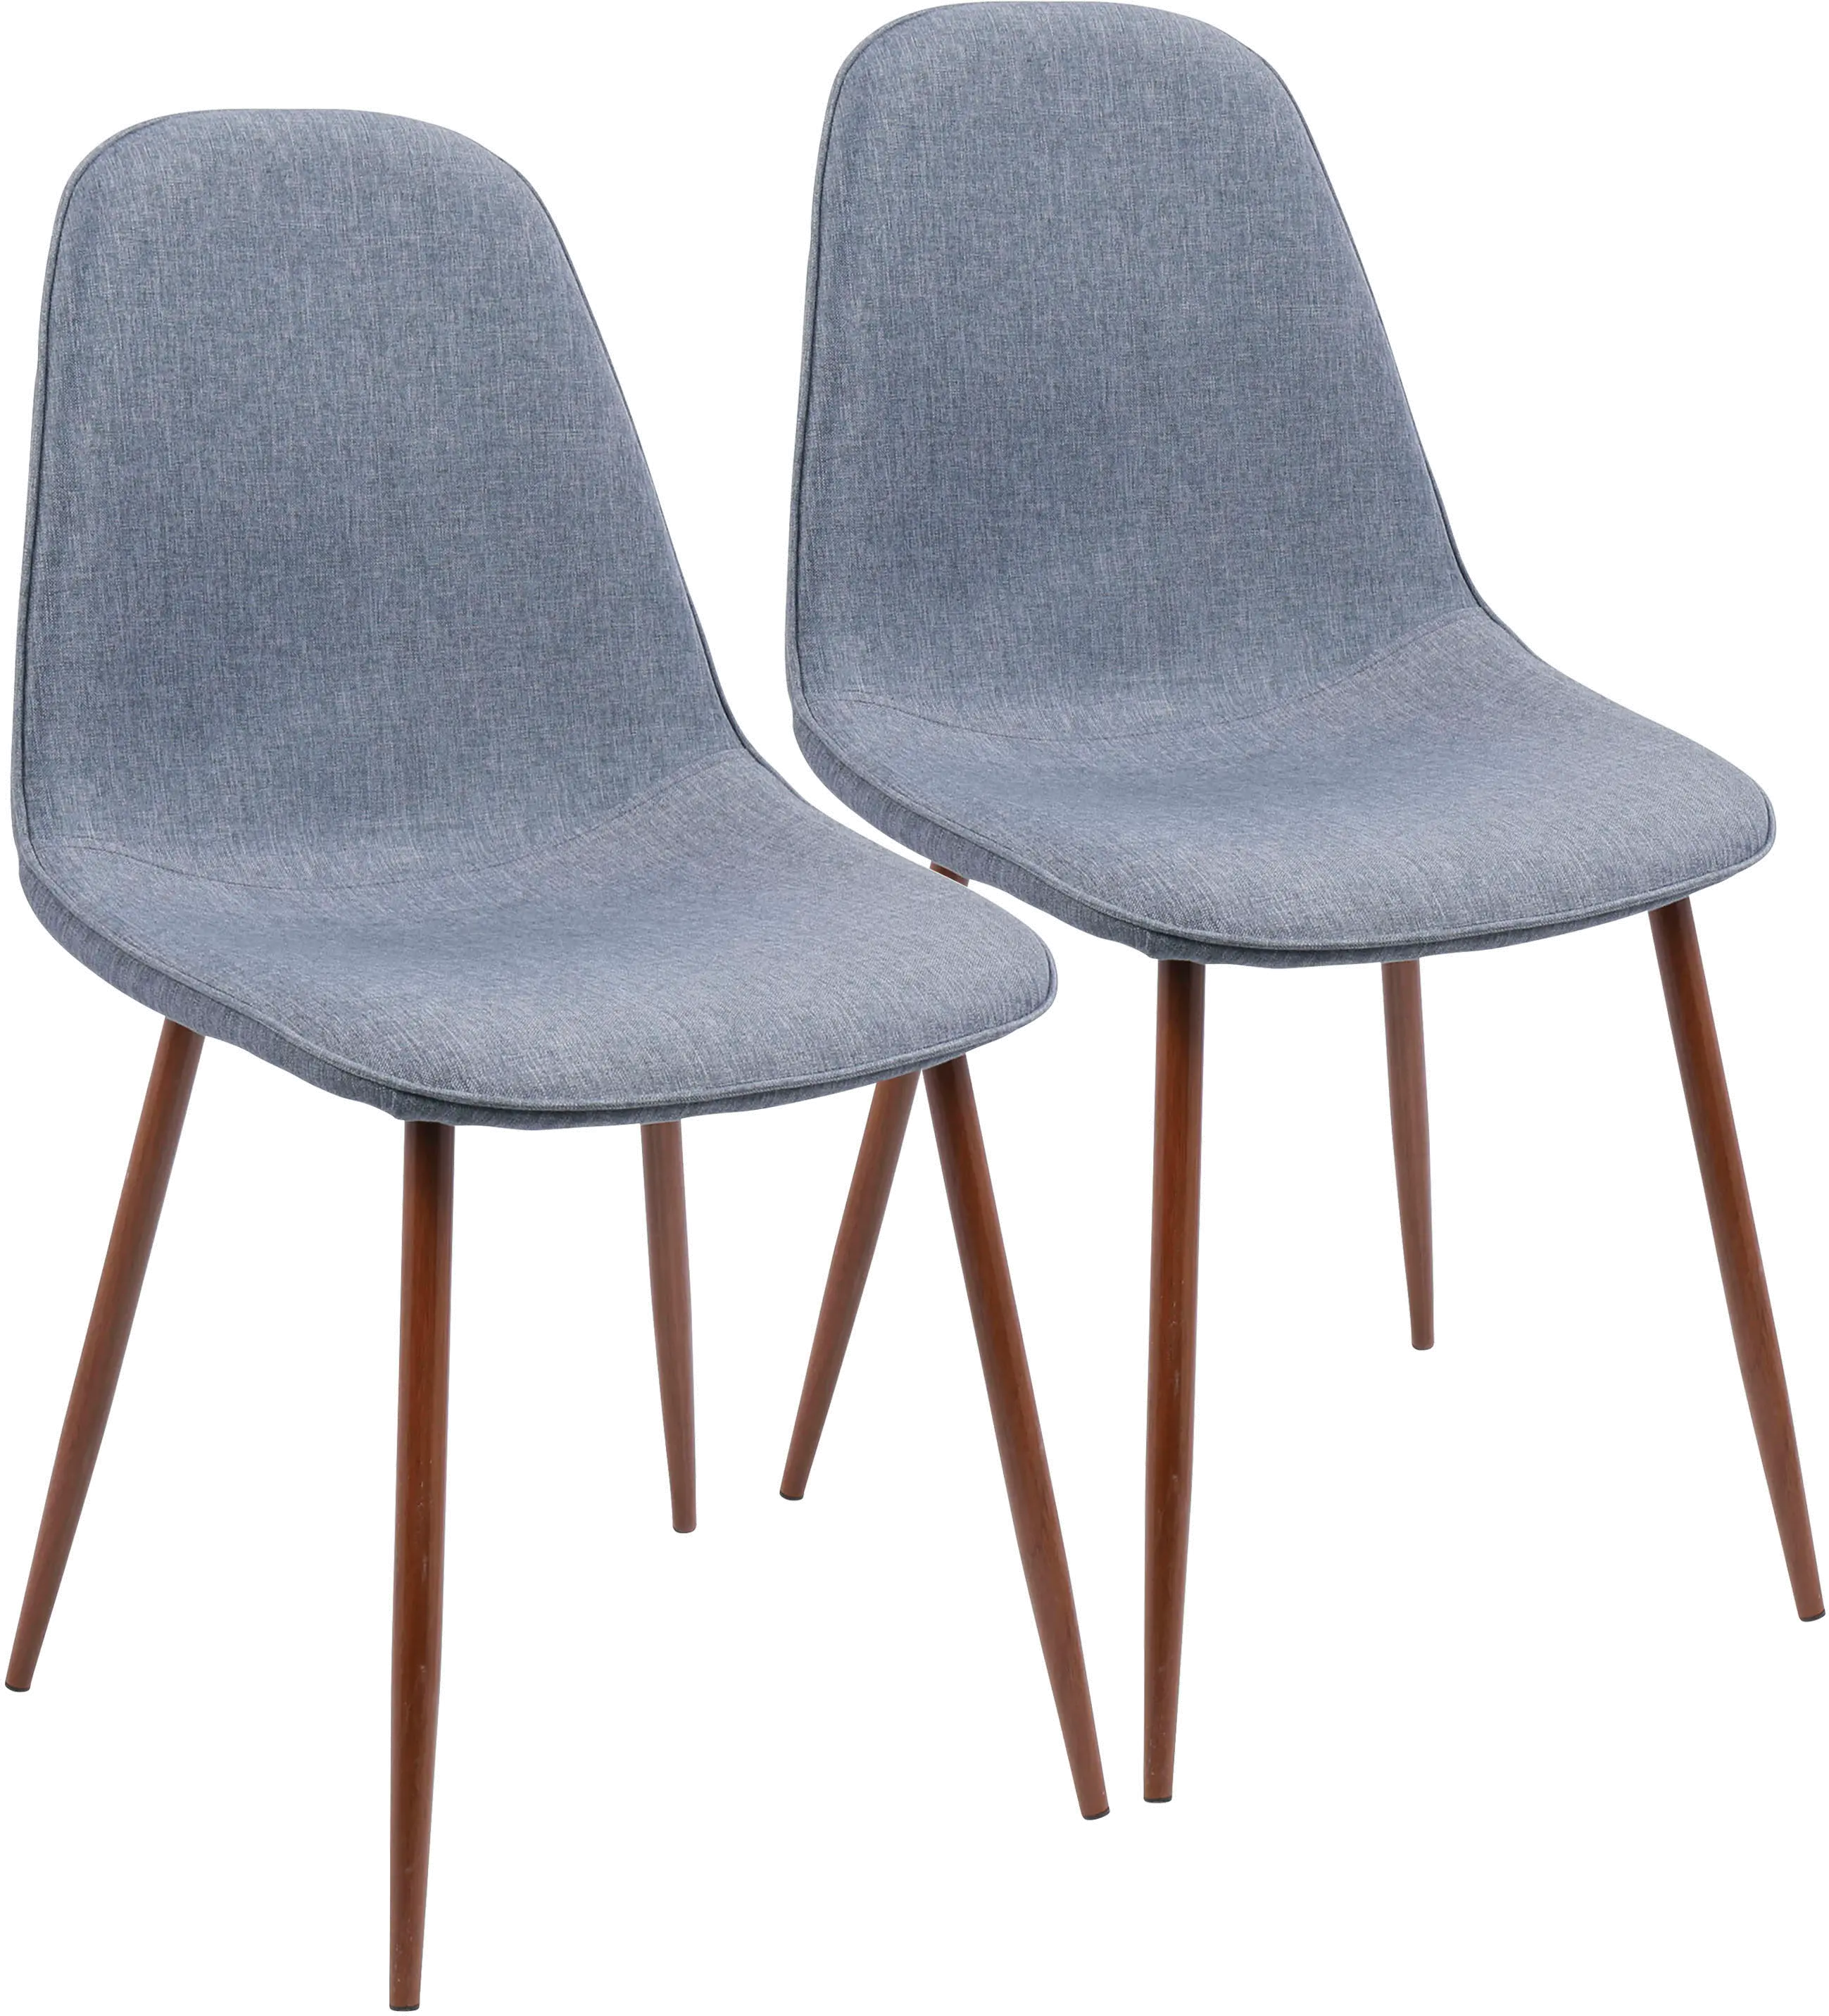 Mid Century Blue Dining Room Chair (Set of 2) - Pebble